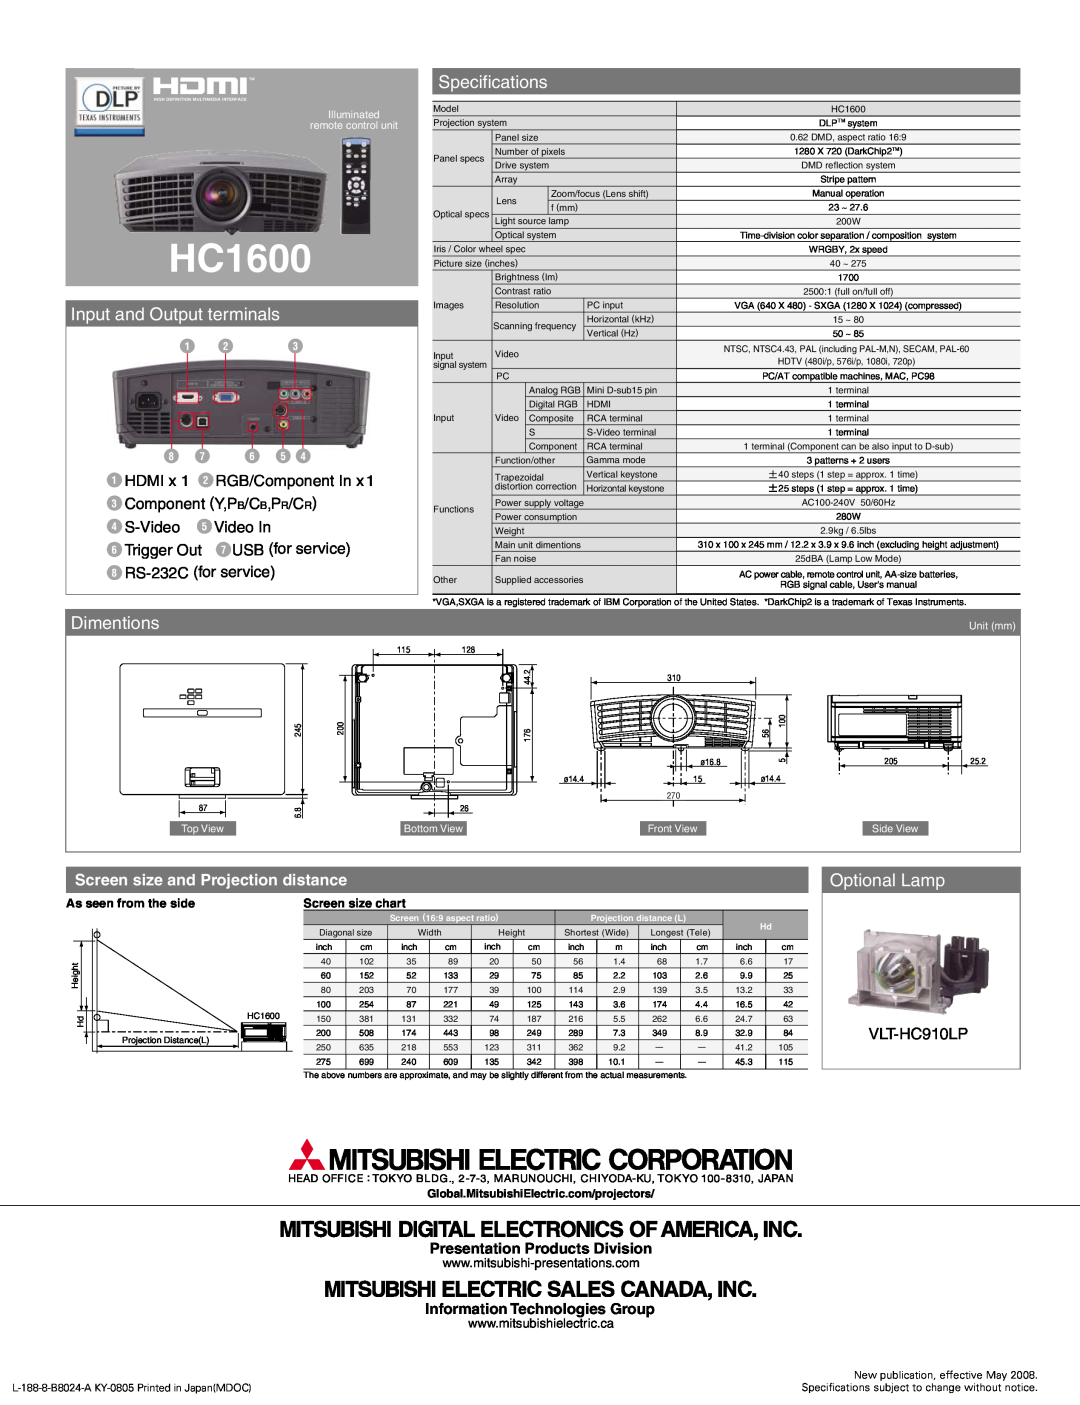 Mitsubishi Electronics HC1600 Specifications, Input and Output terminals, Dimentions, Optional Lamp, S-Video, Video In 